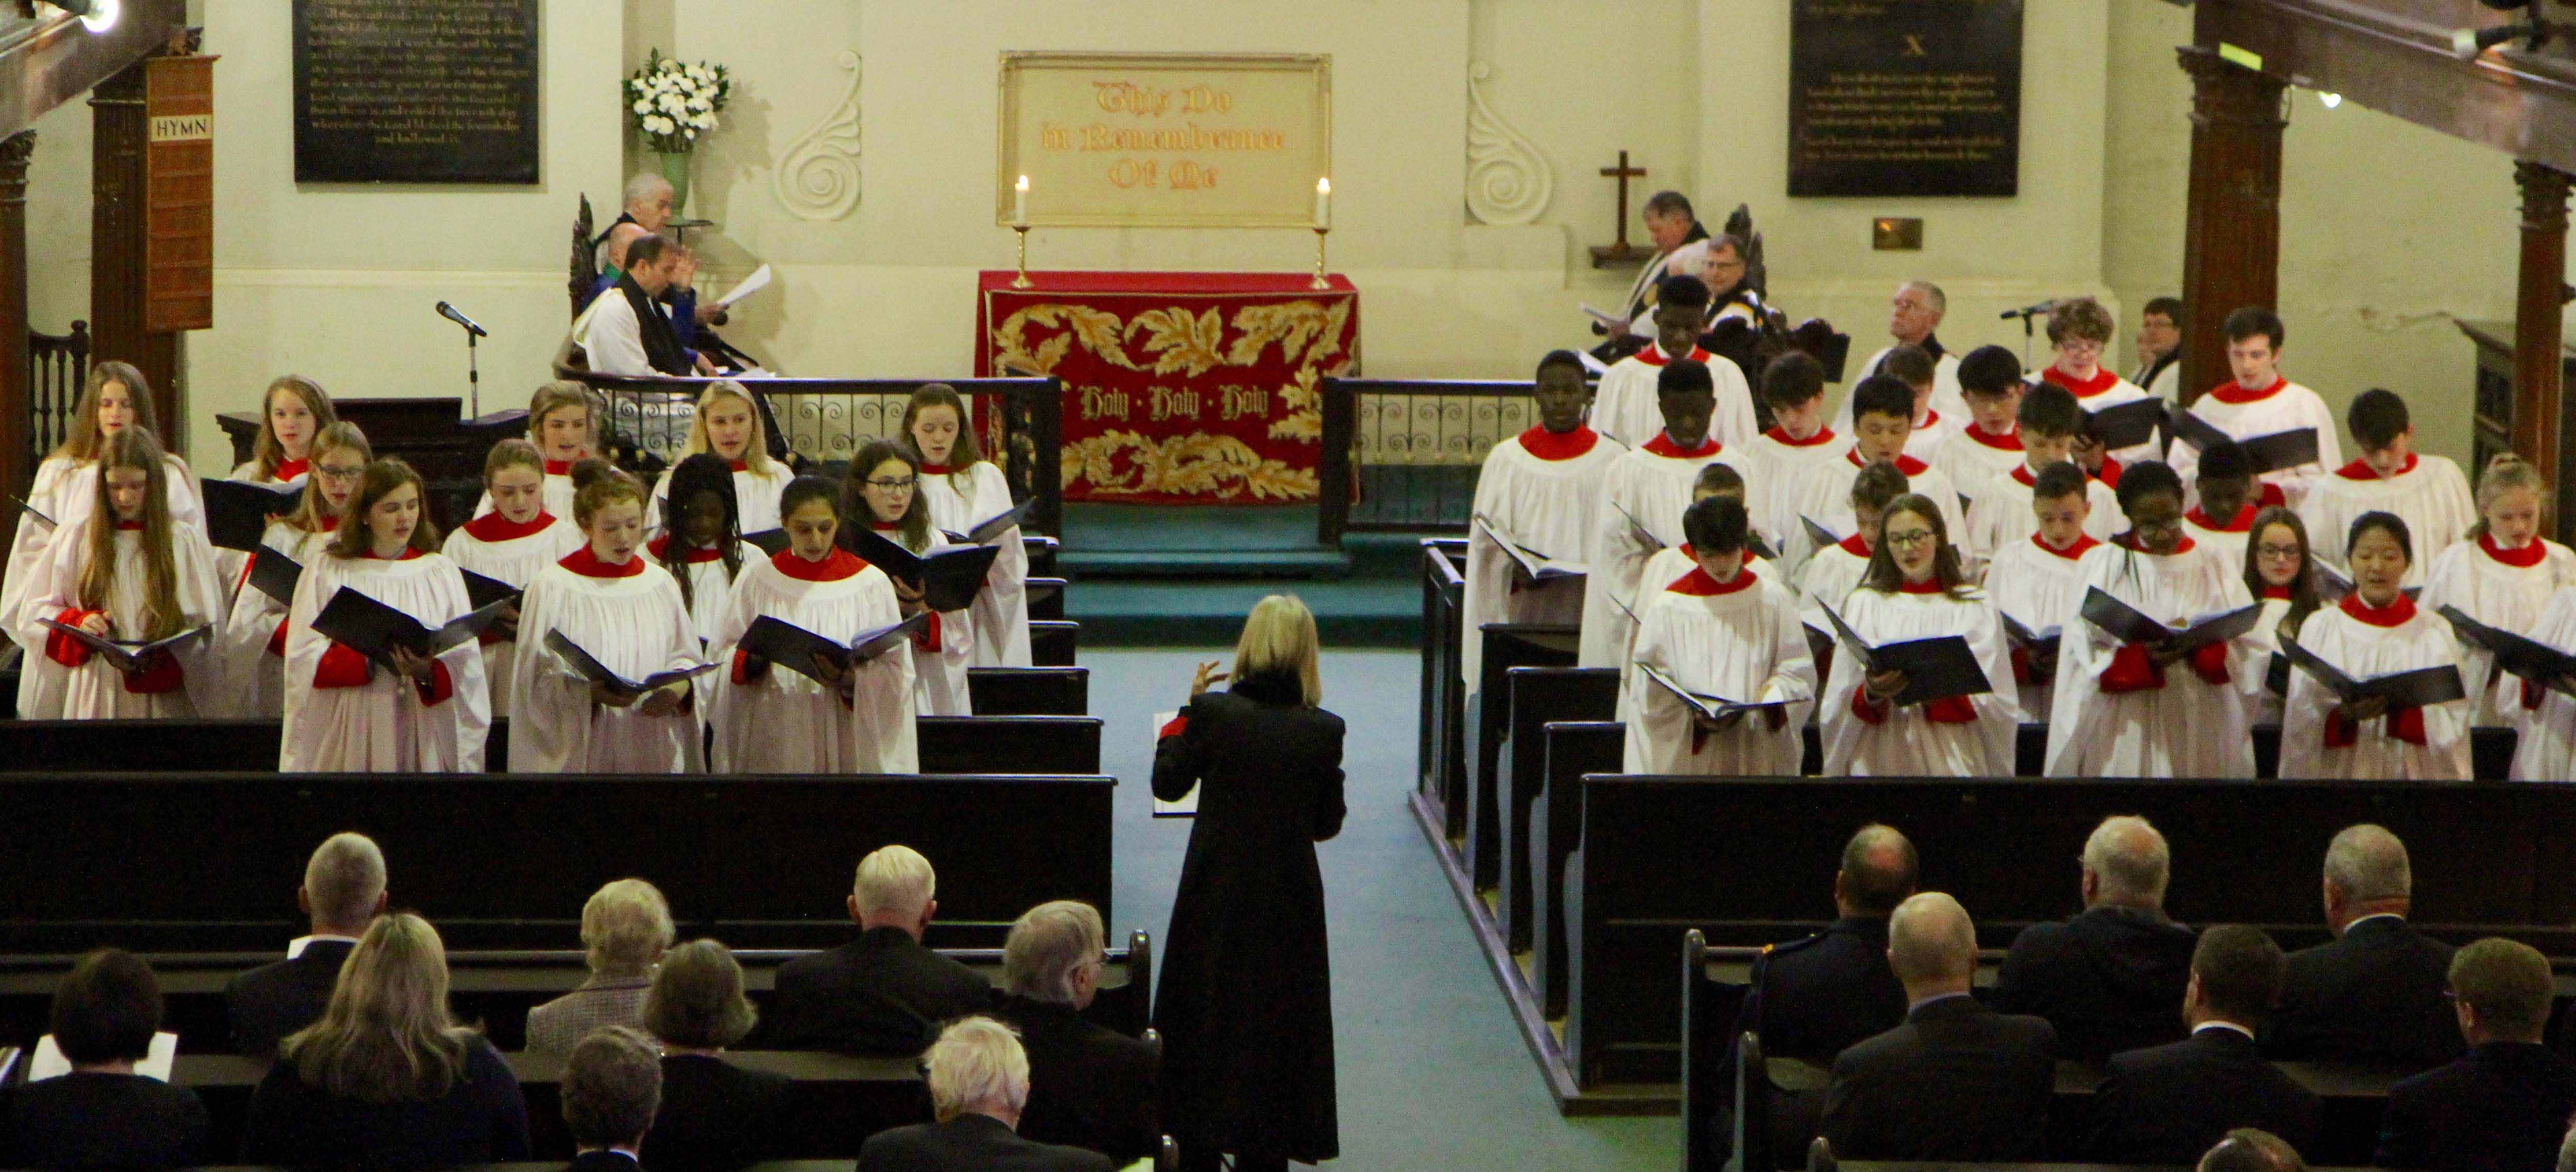 The Choir of the King's Hospital School singing at the New Law Term Service.